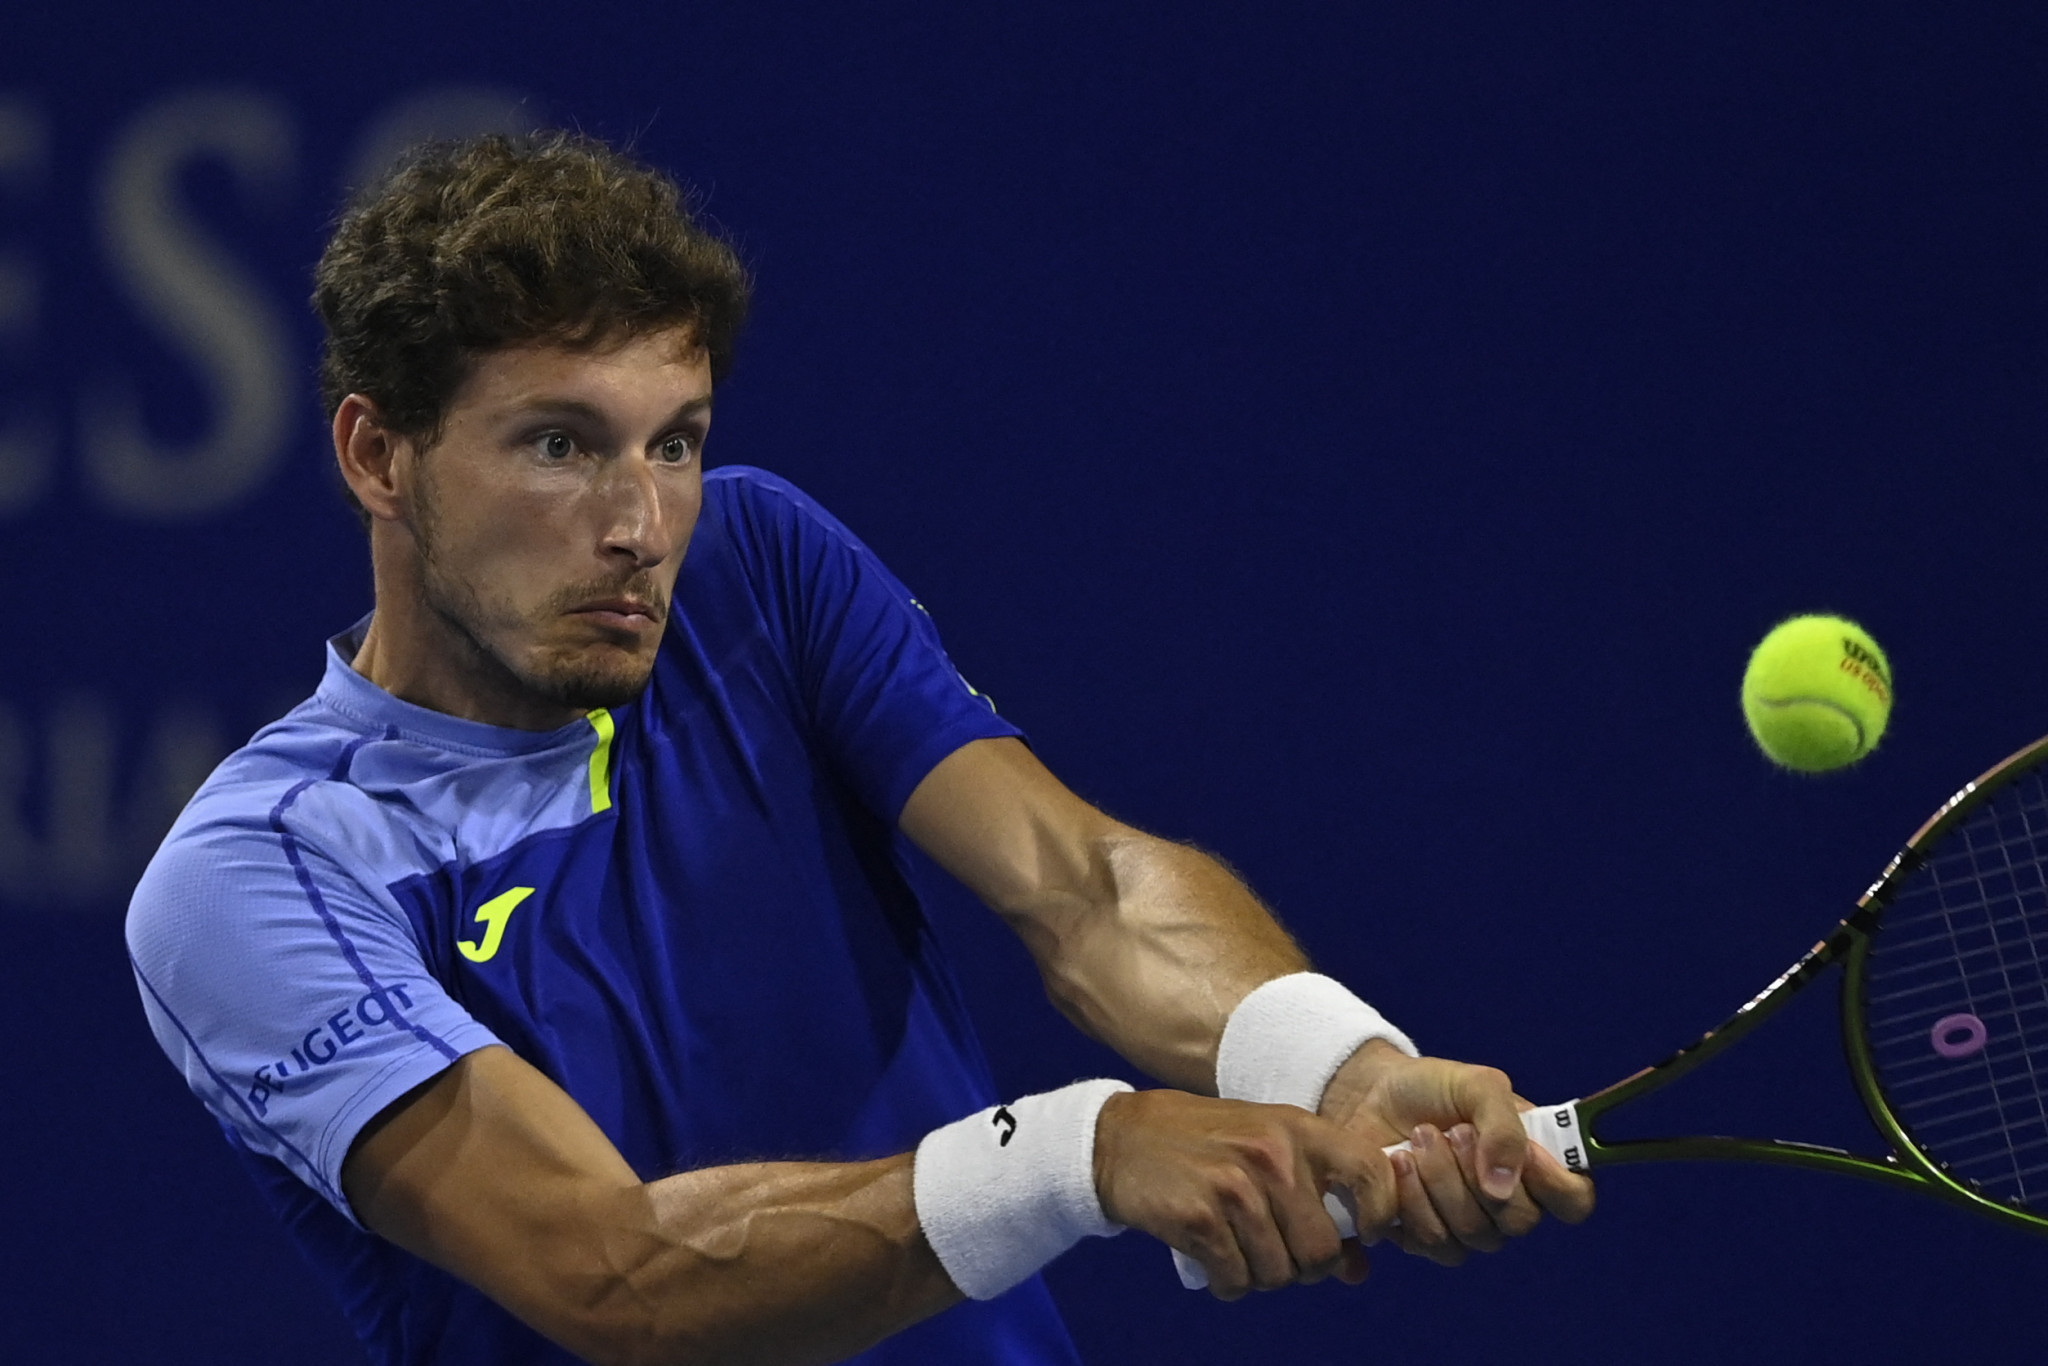 Pablo Carreño Busta will be part of Spain's team for their clash with Romania ©Getty Images